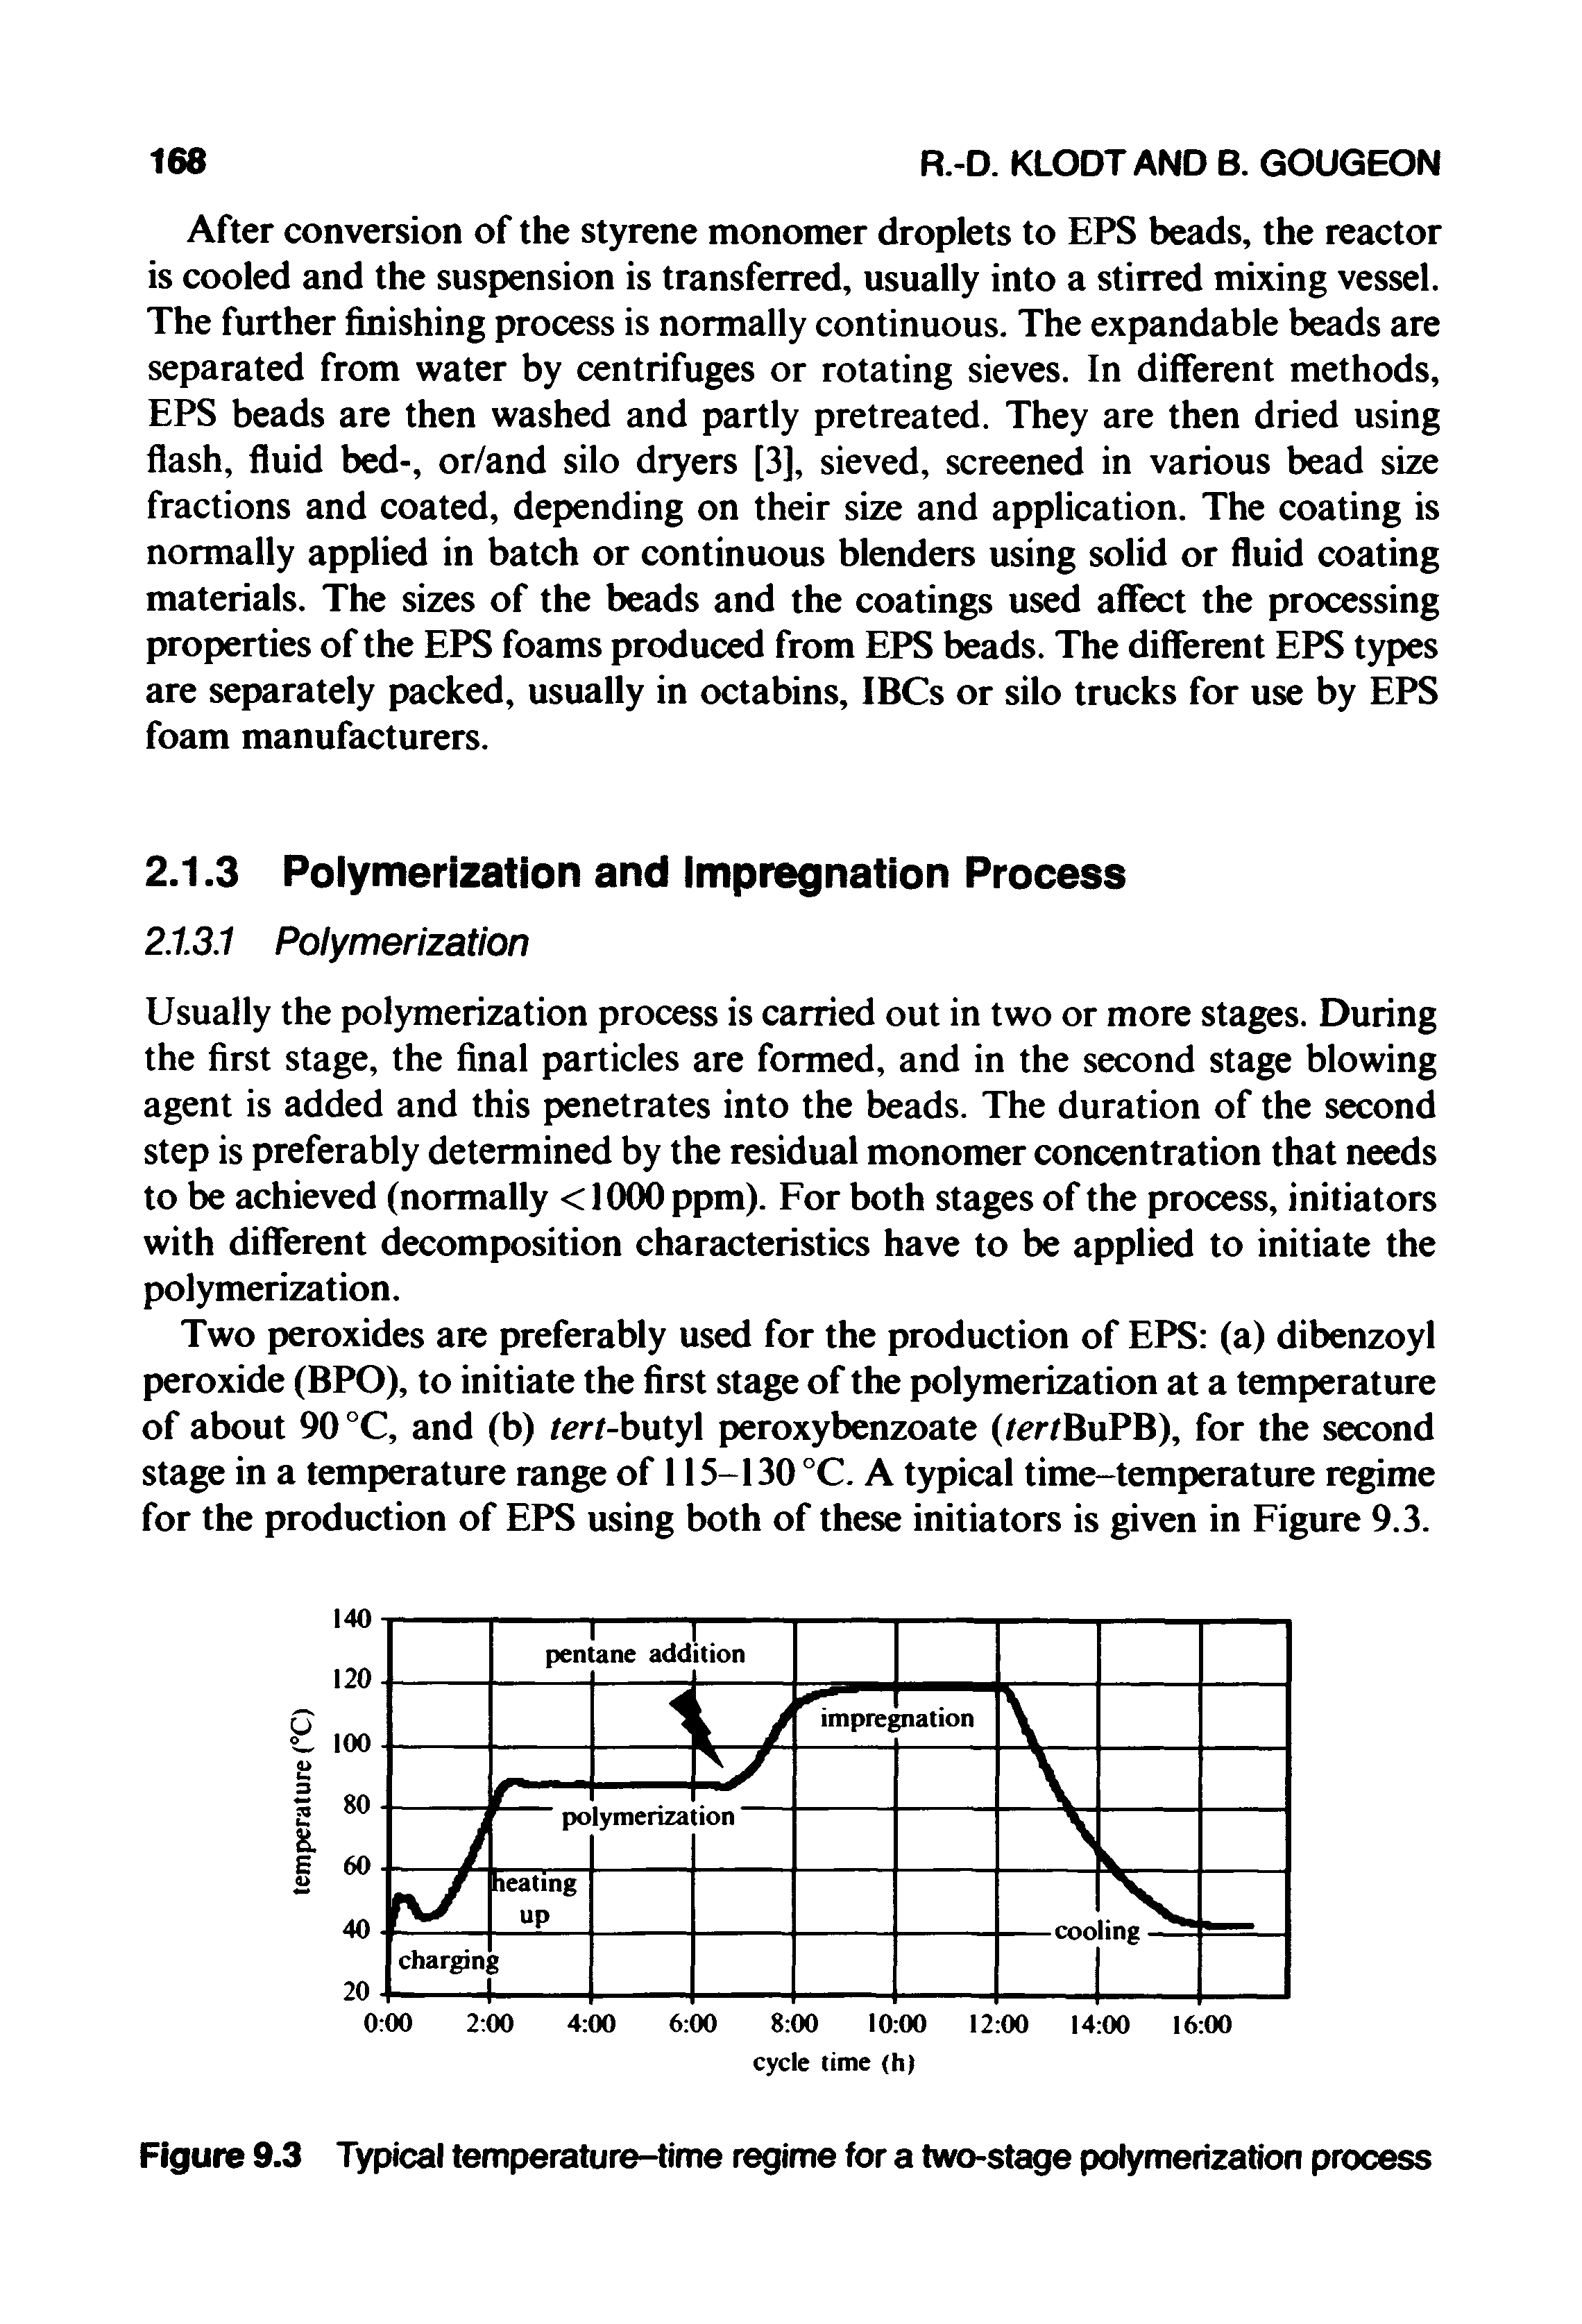 Figure 9.3 Typical temperature-time regime for a two-stage polymerization process...